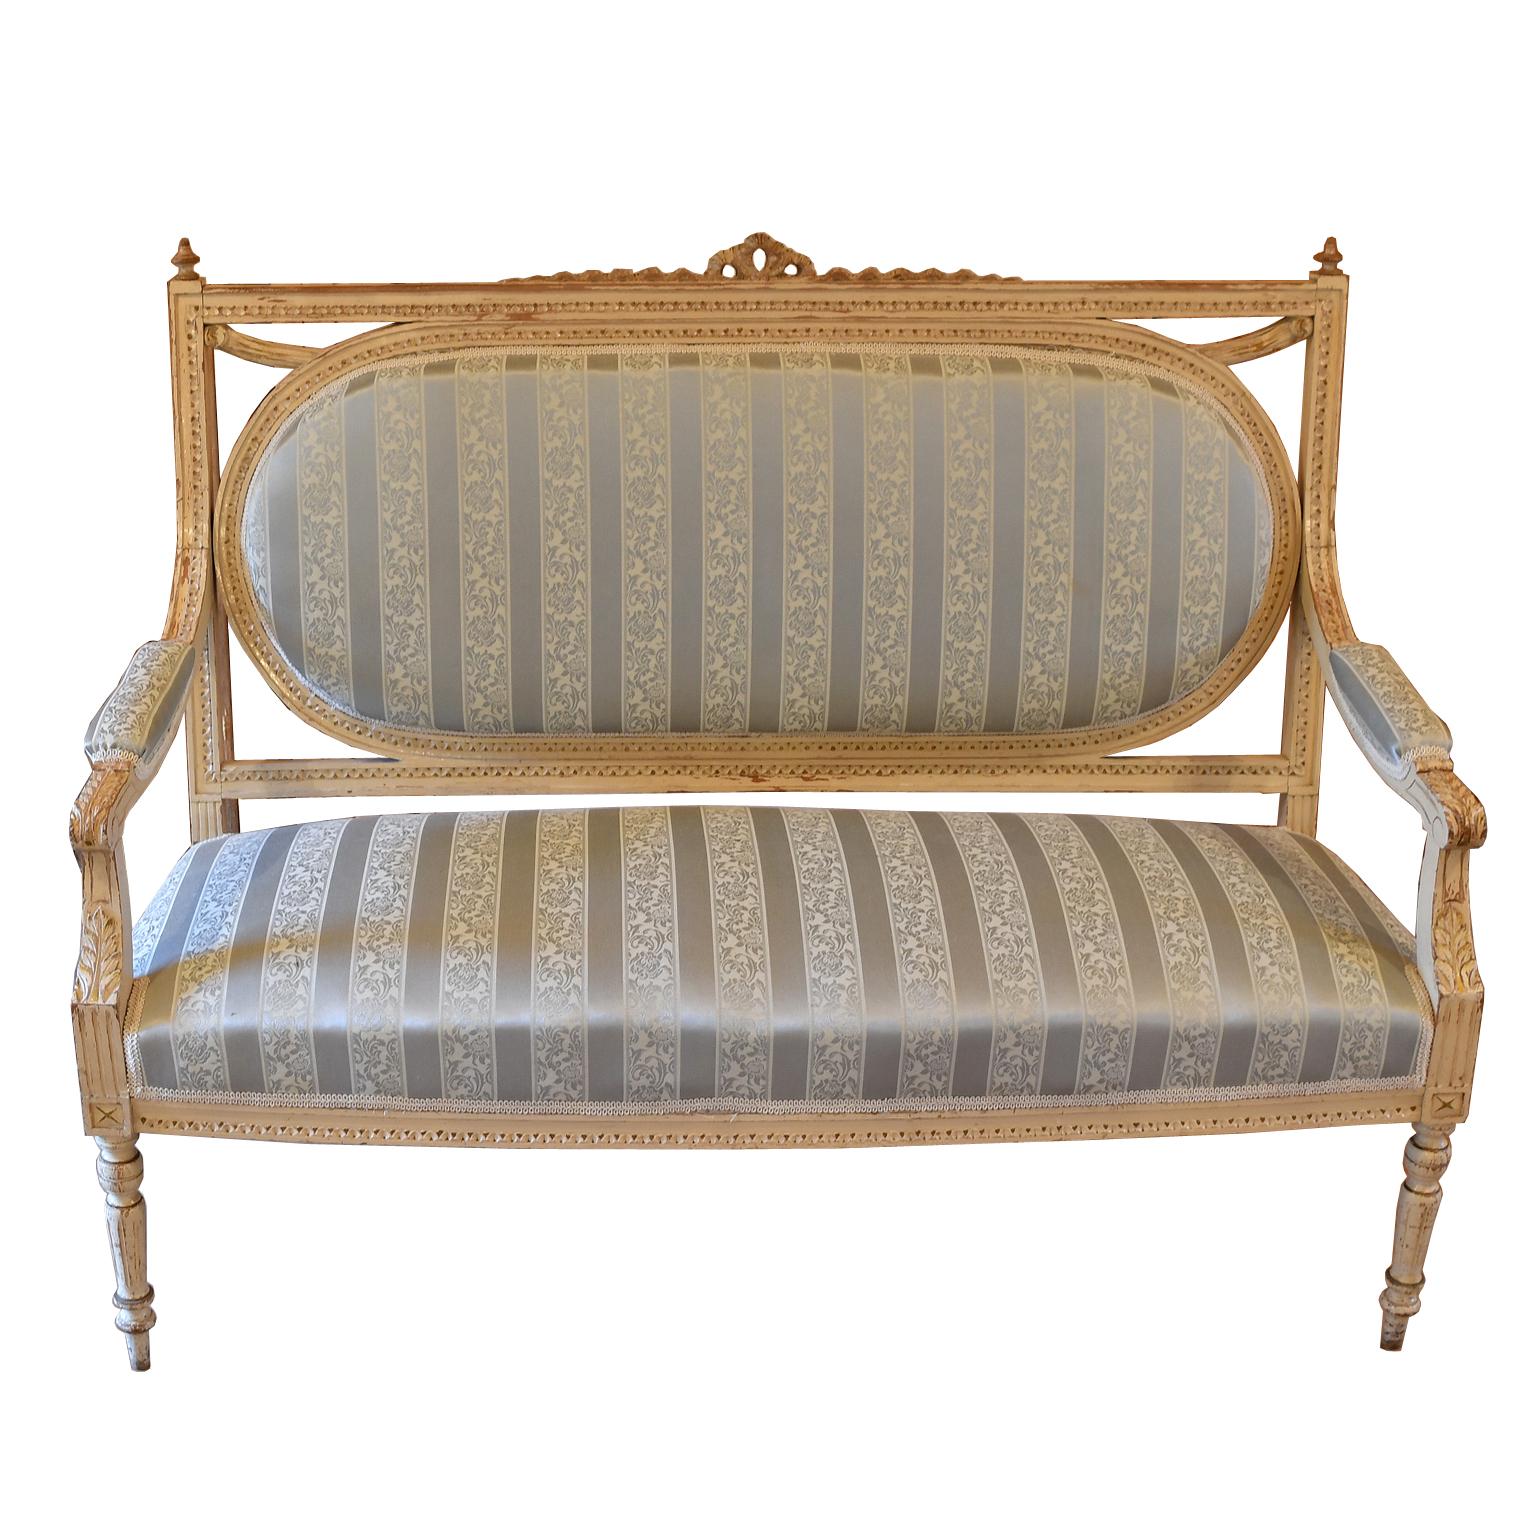 A lovely Louis XVI style canape/ settee with upholstered seat & back, & painted white/grey distressed finish on wooden frame. Details include carved swag & acanthus-leaf motif, with turned front legs & saber rear legs. While more recent but not new,